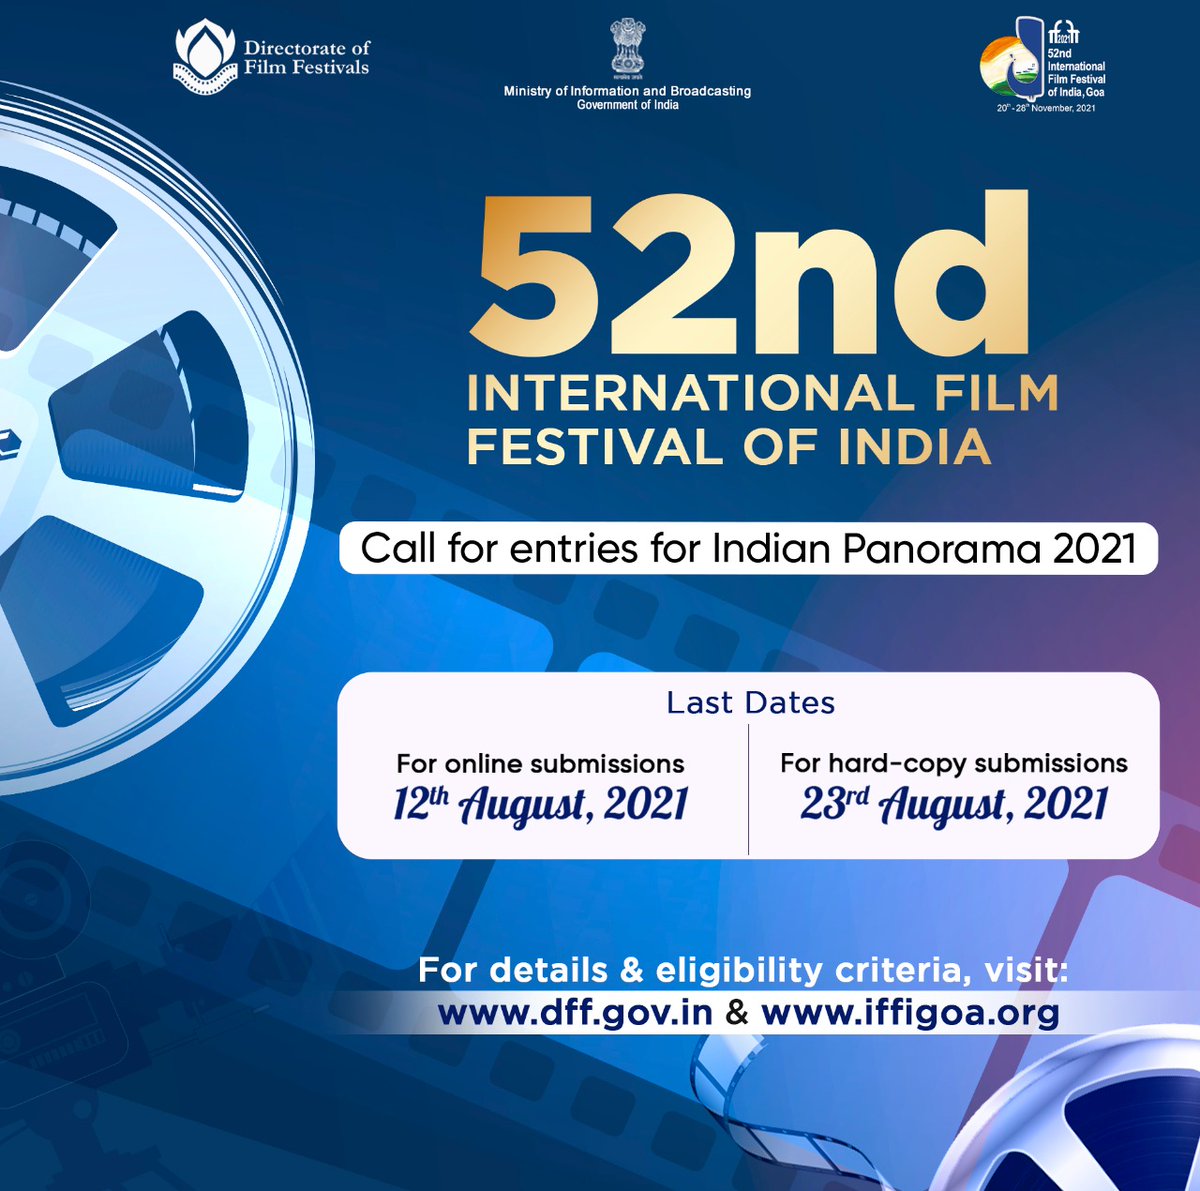 Pib India Calling Filmmakers At Iffi52 Last Date For Indian Panorama Entries Draws Near Do Not Miss Your Chance To Be A Part Of India S Biggest Festival Submit Your Applications